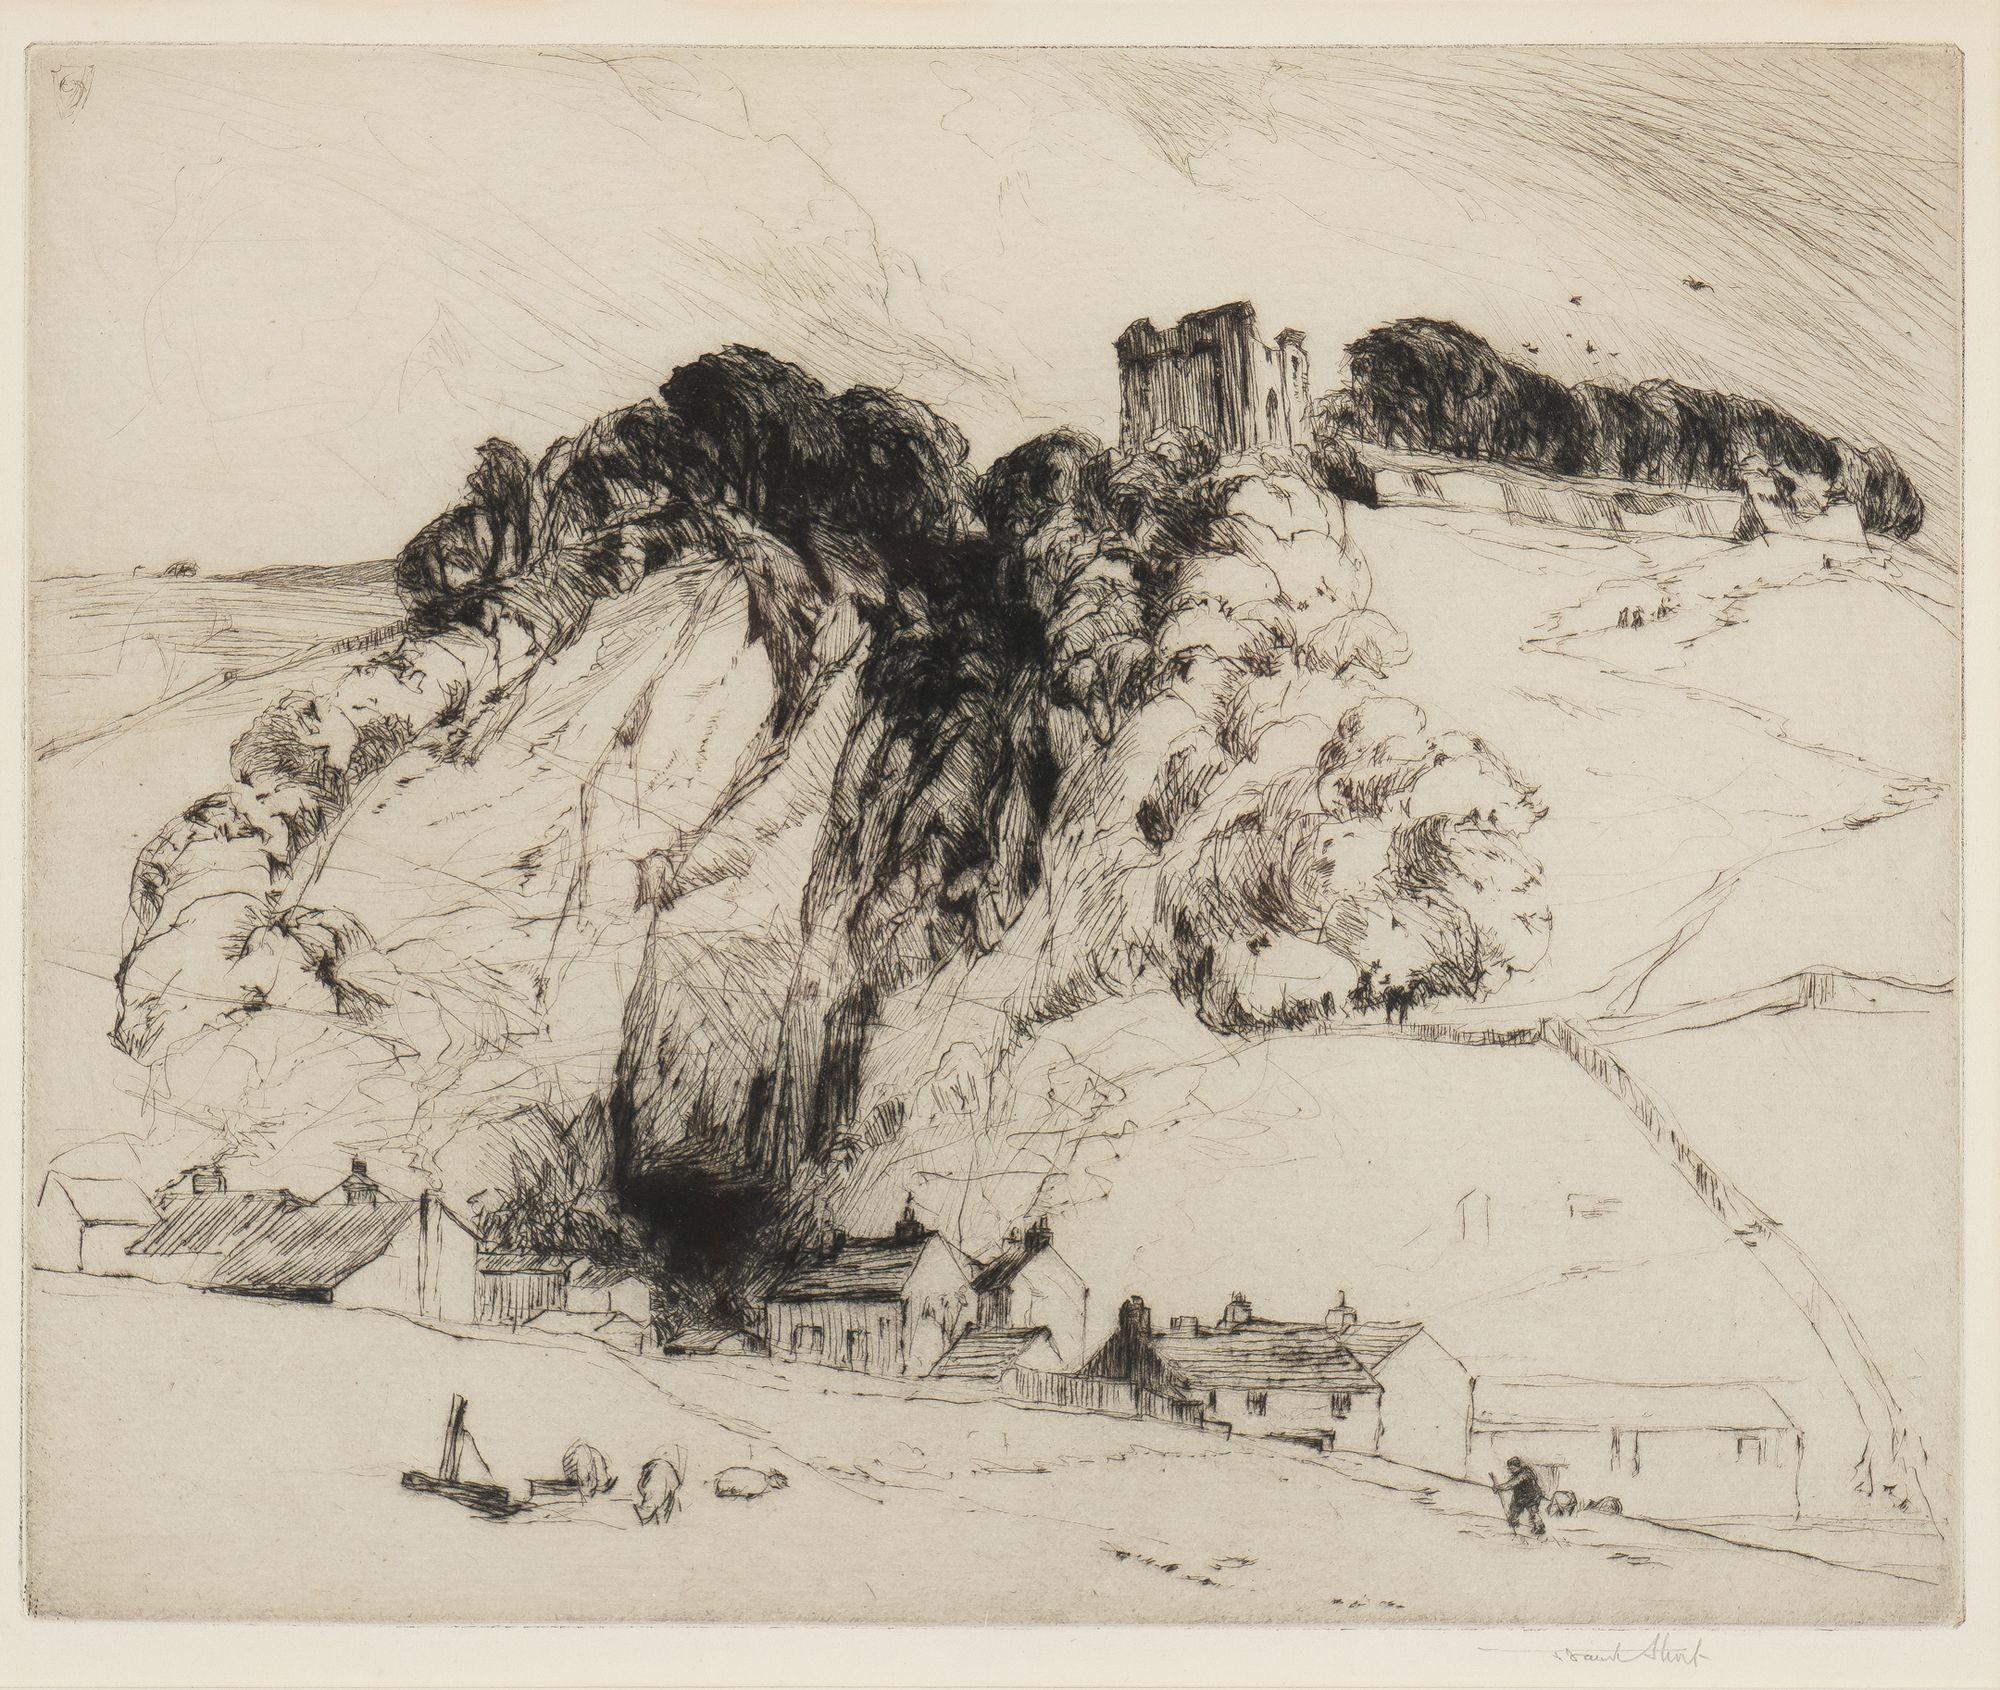 Drypoint landscape etching on paper of Penerils Castle, Derbyshire, England. The etching is loose and expressive, with the castle looming above the village below and a small figure in the foreground.

Signed in graphite, lower right: Frank